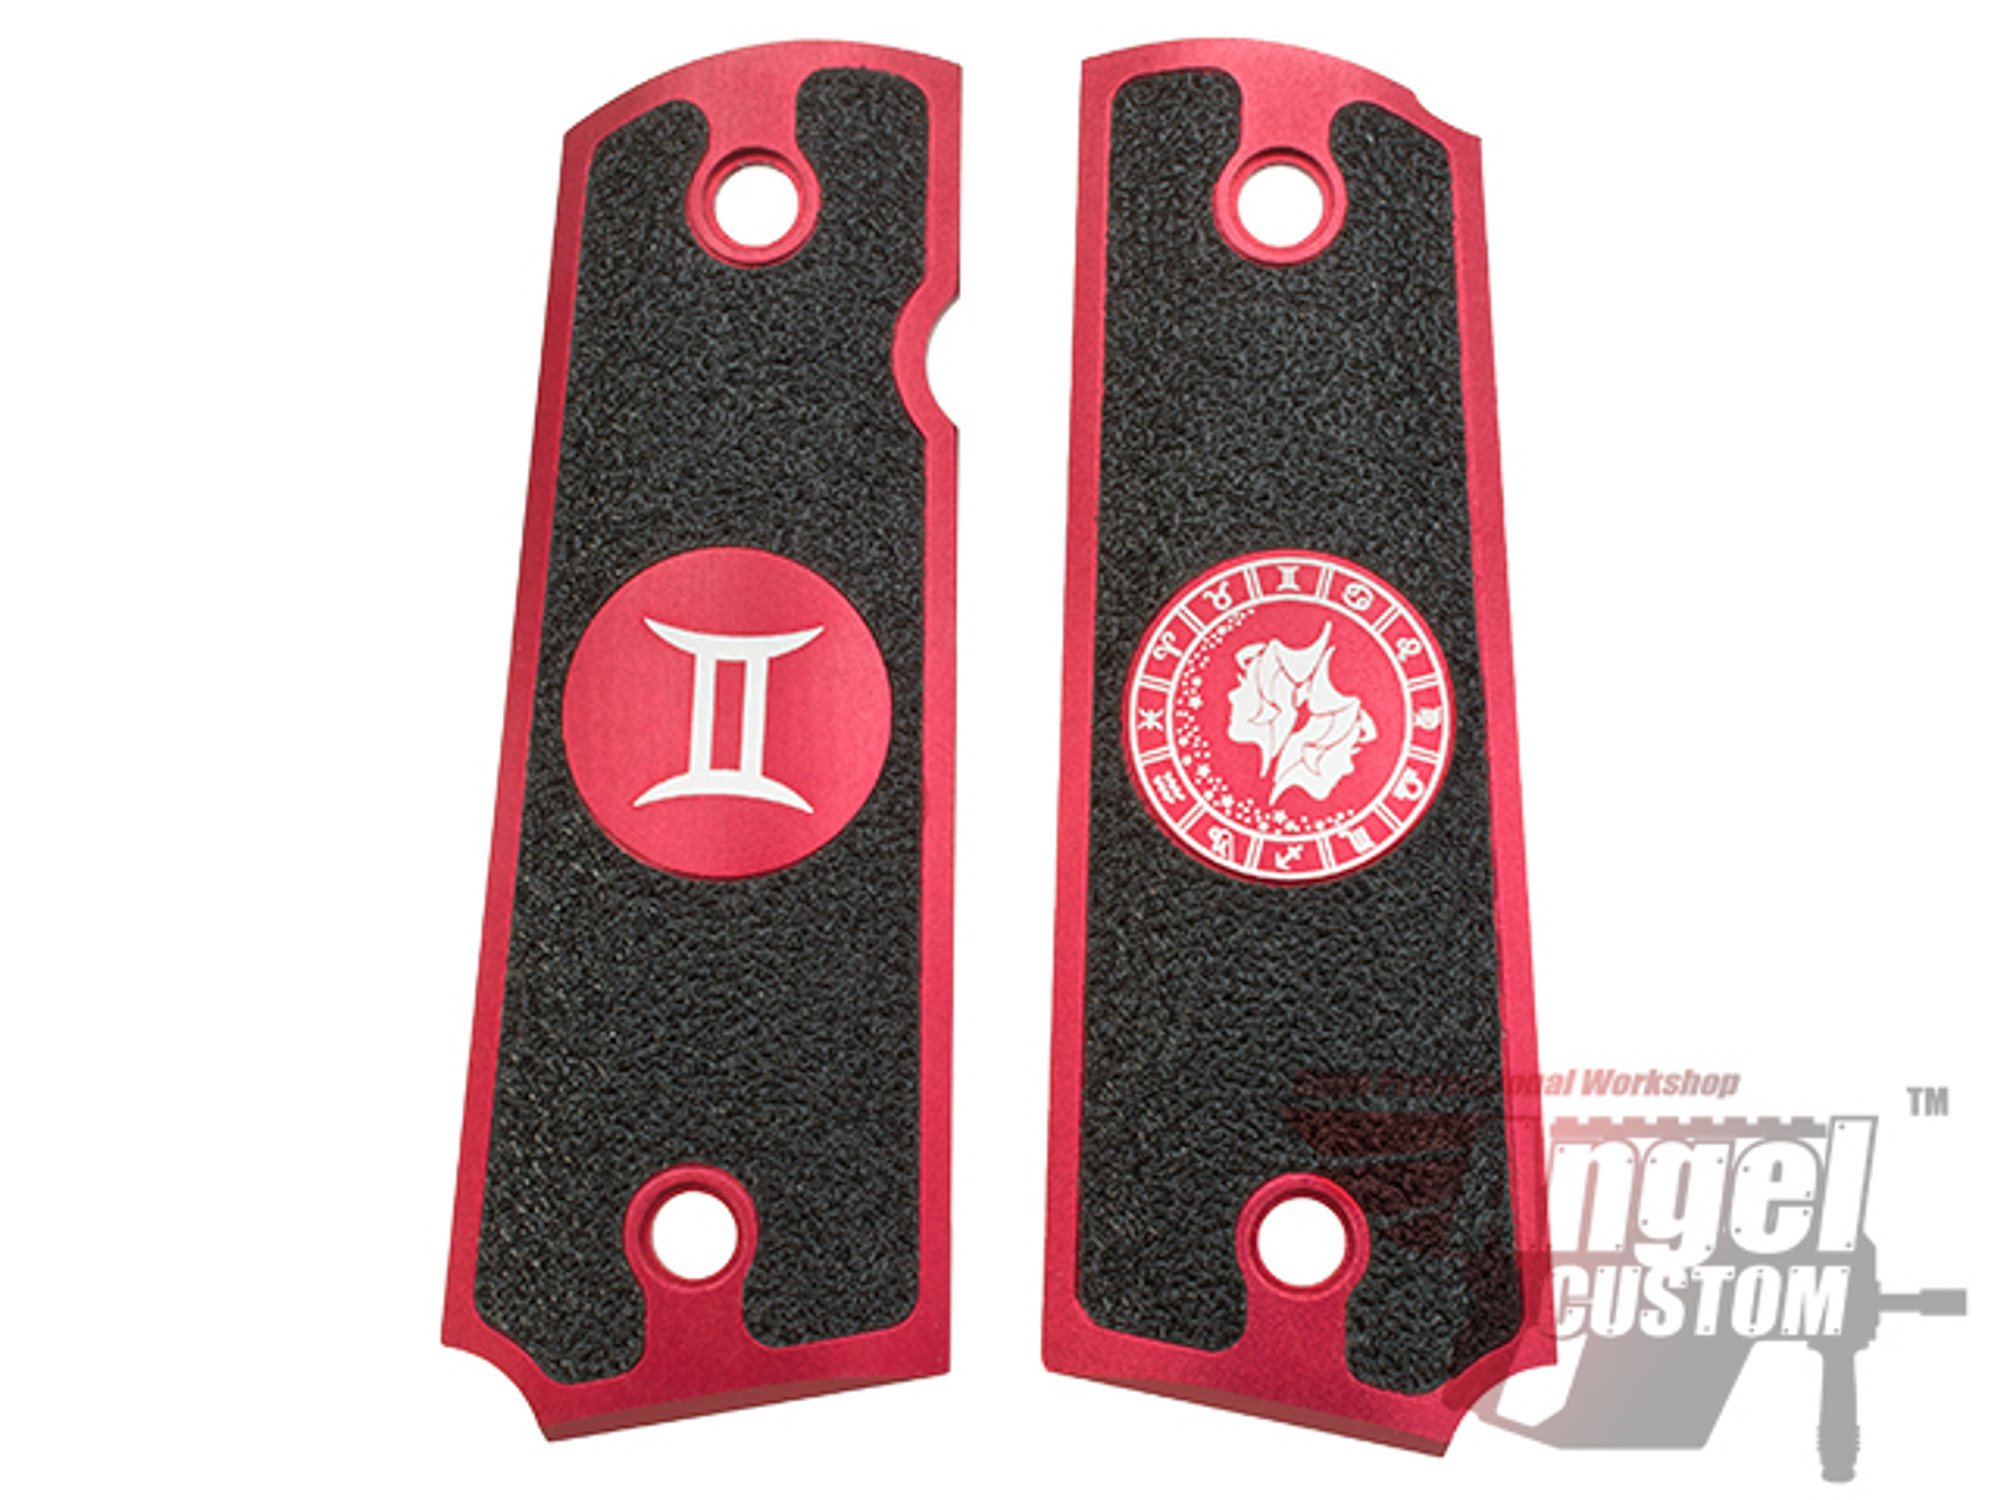 Angel Custom CNC Machined Tac-Glove "Zodiac" Grips for Tokyo Marui/KWA/Western Arms 1911 Series Airsoft Pistols - Red (Sign: Gemini)